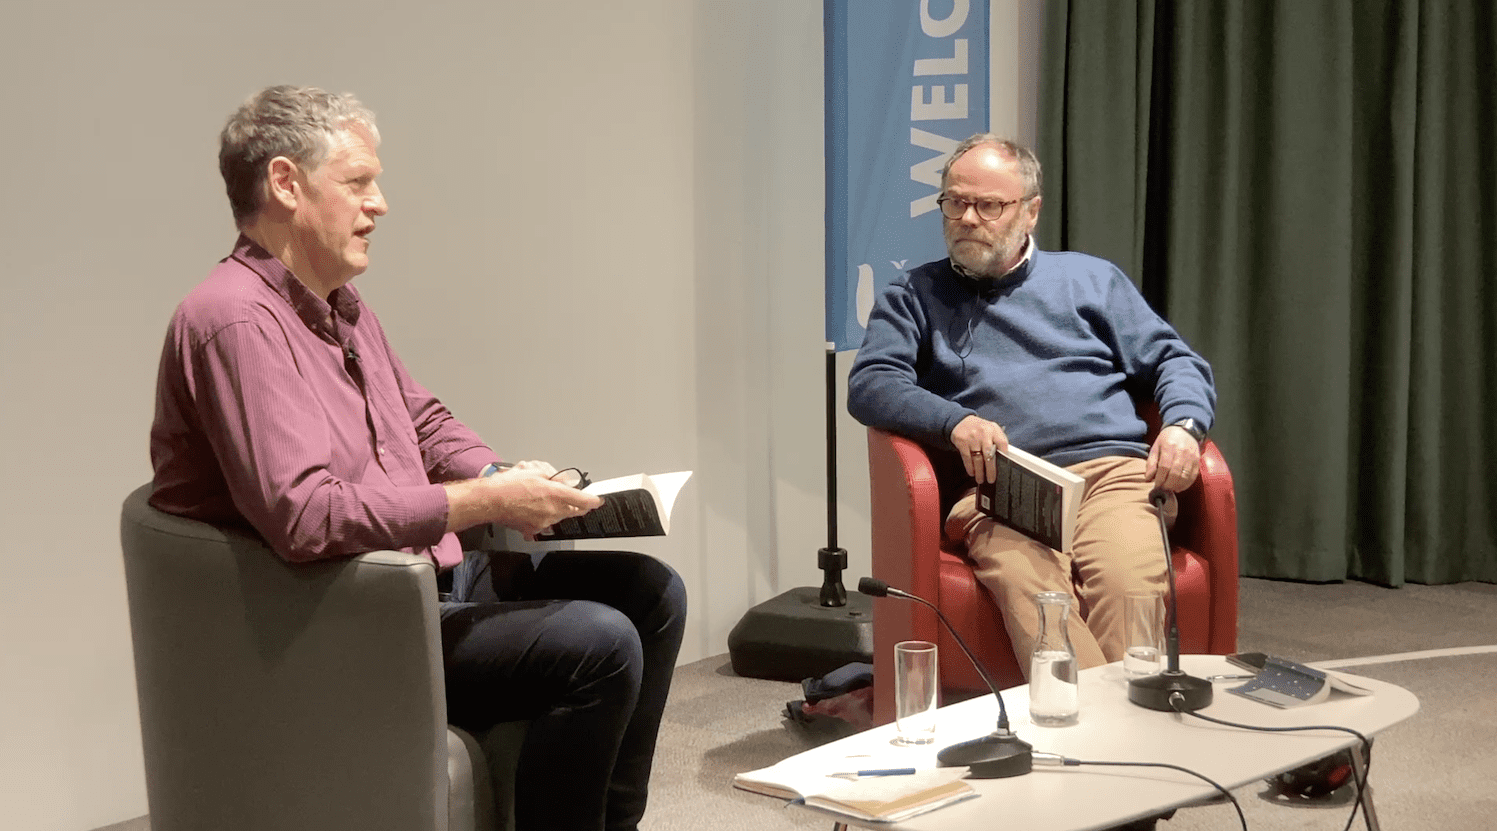 Duncan Morrow in conversation with author Malachi O'Doherty about his new book Can Ireland Be One at Ulster University as part of recent Look North Festival